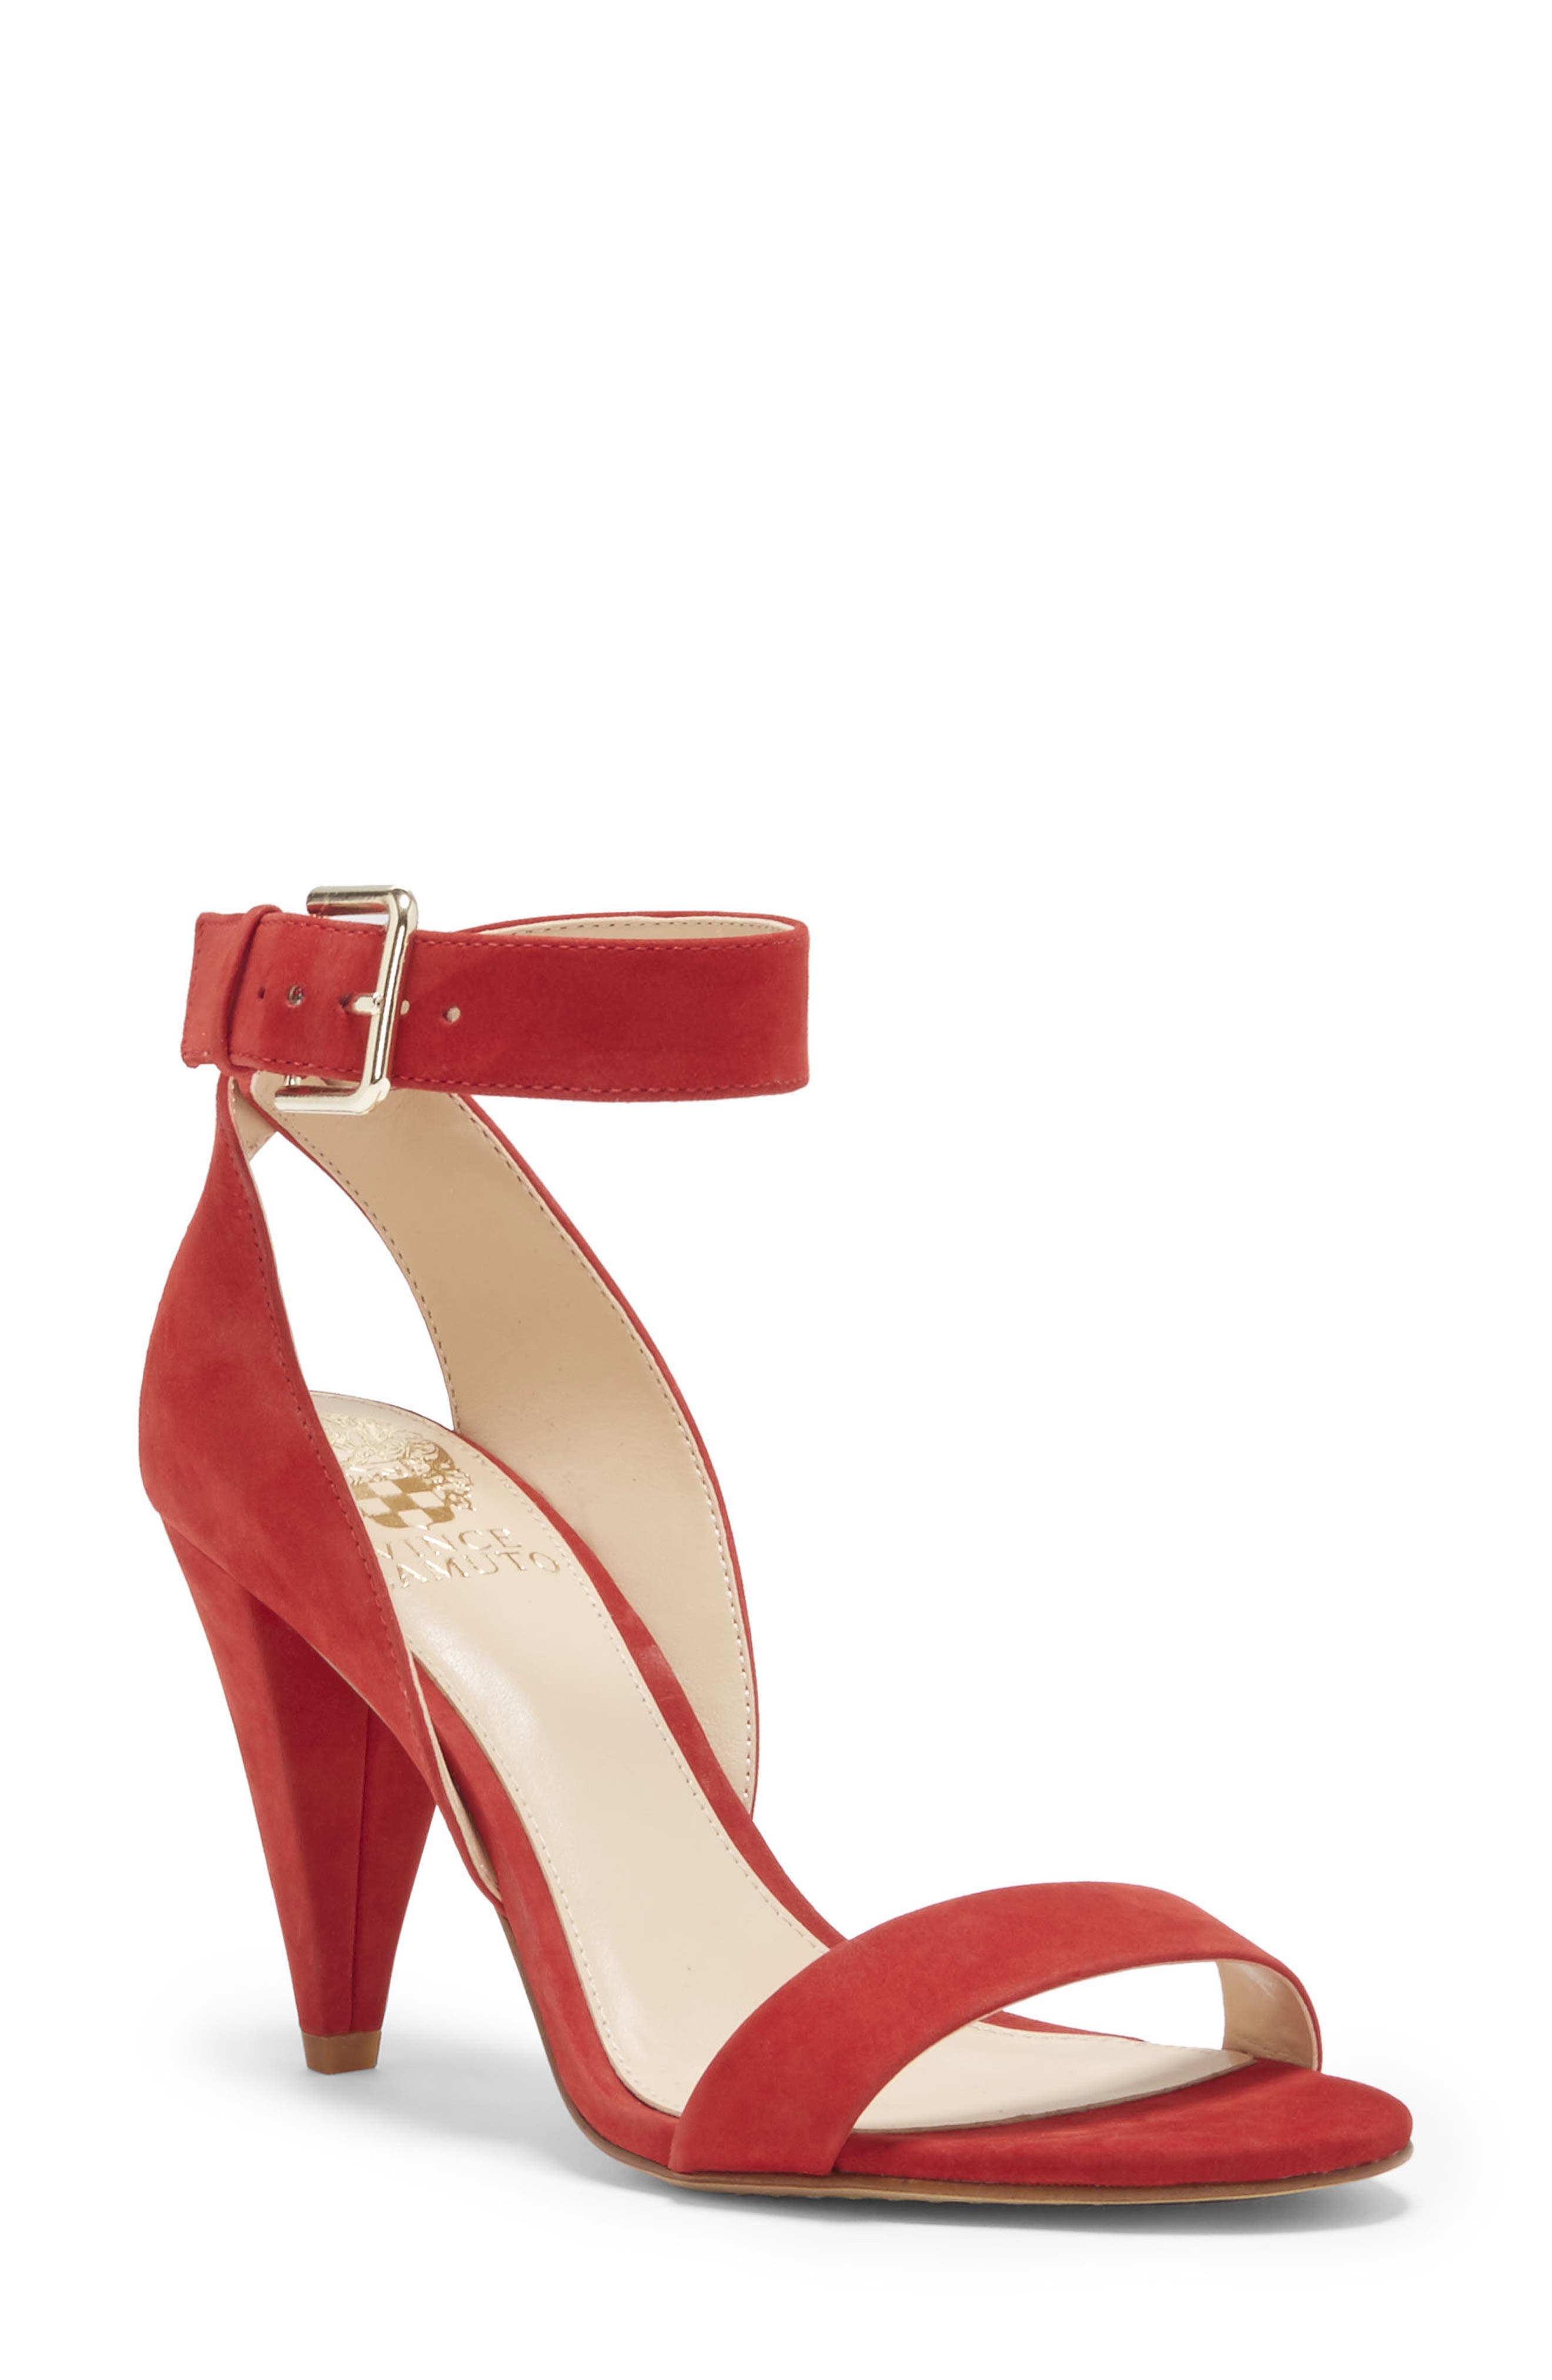 Vince Camuto Caitriona Sandal In Cherry 